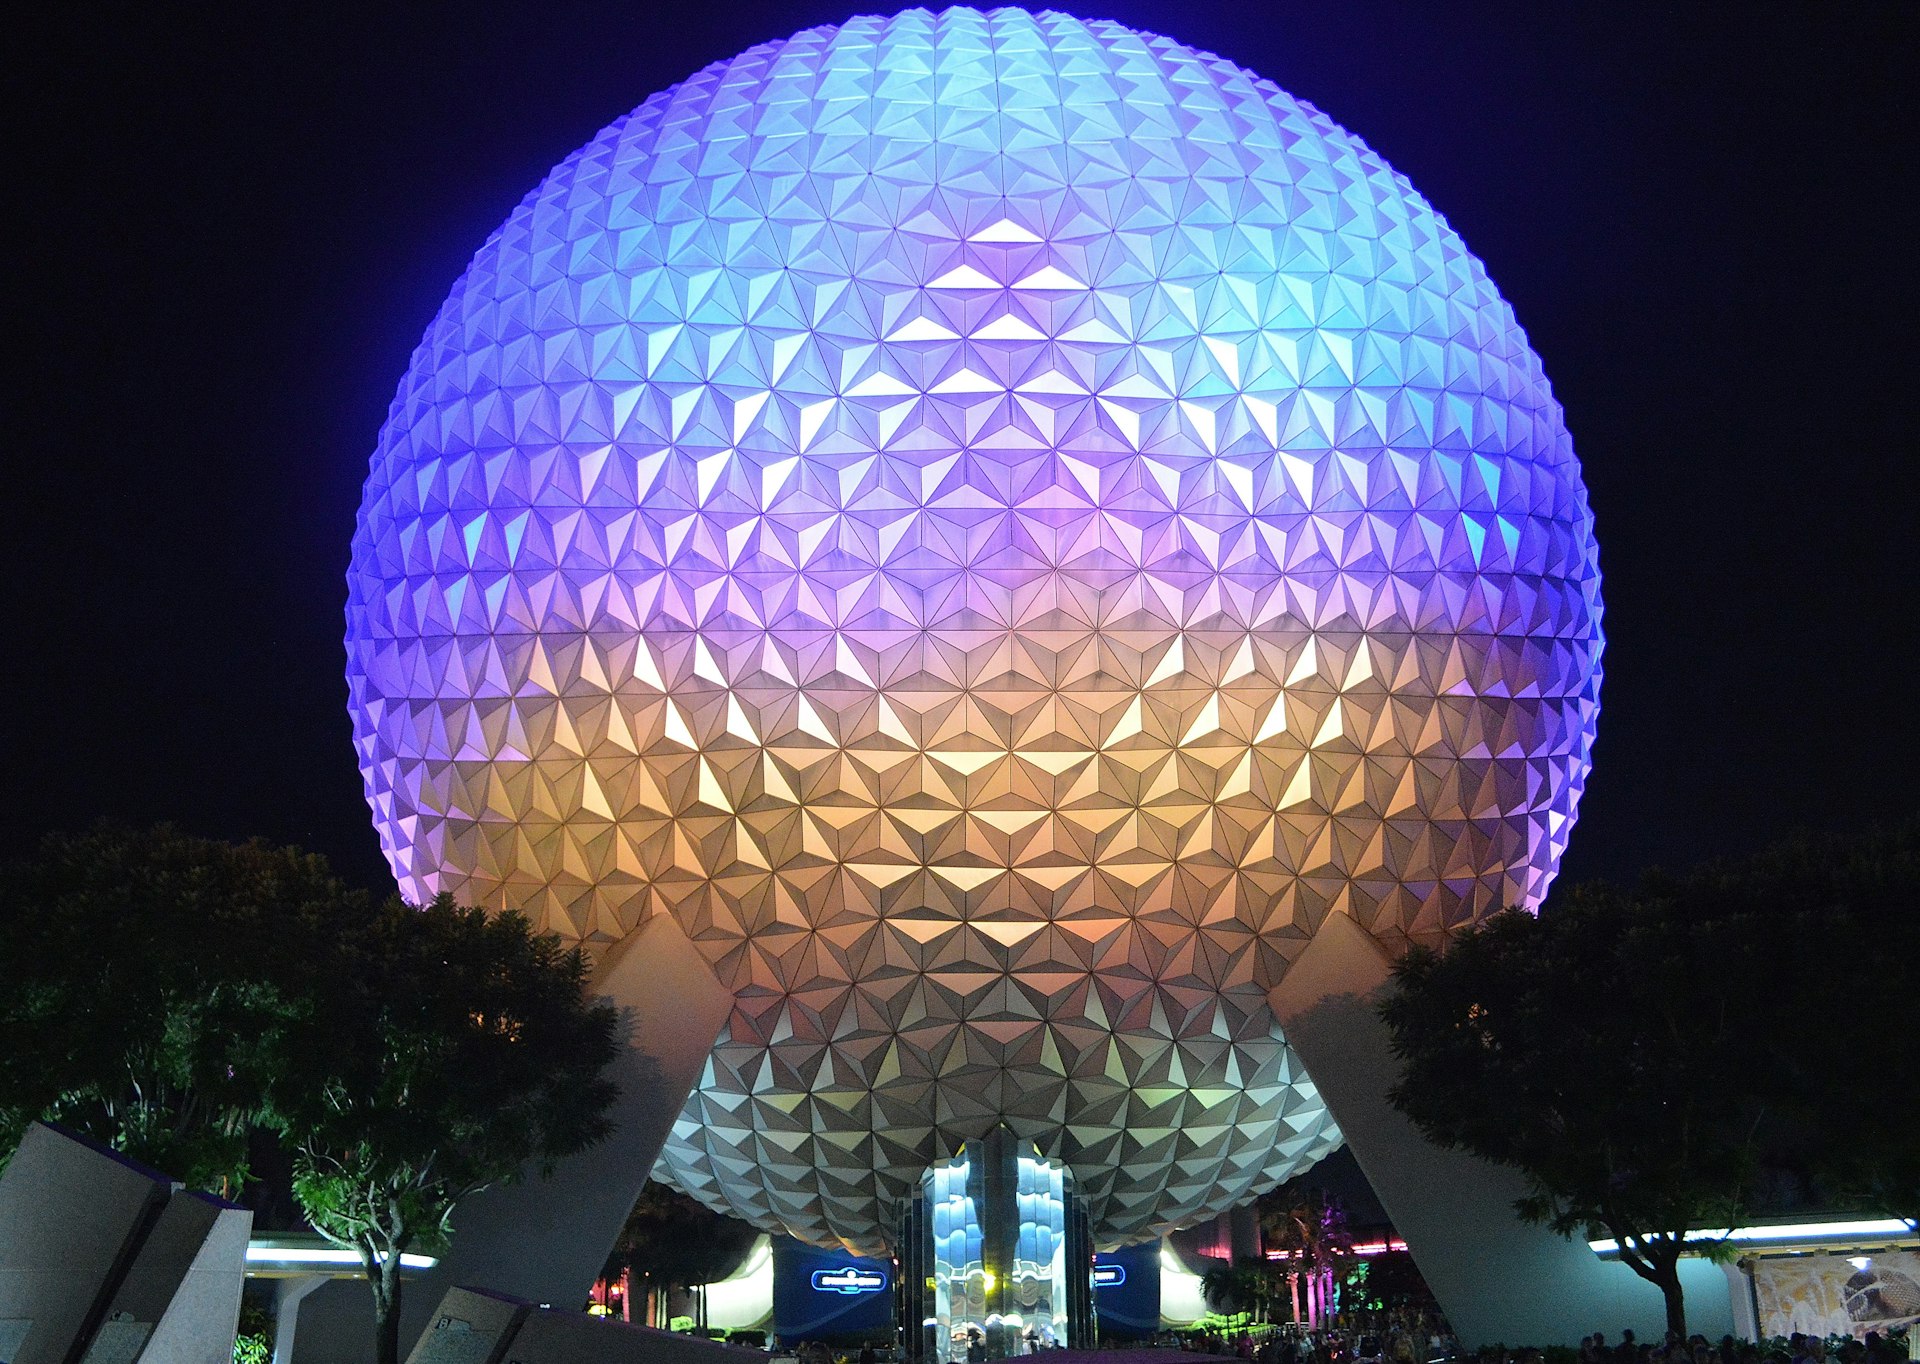 A large silver-grey sphere is lit up with purple and gold lights against the night sky